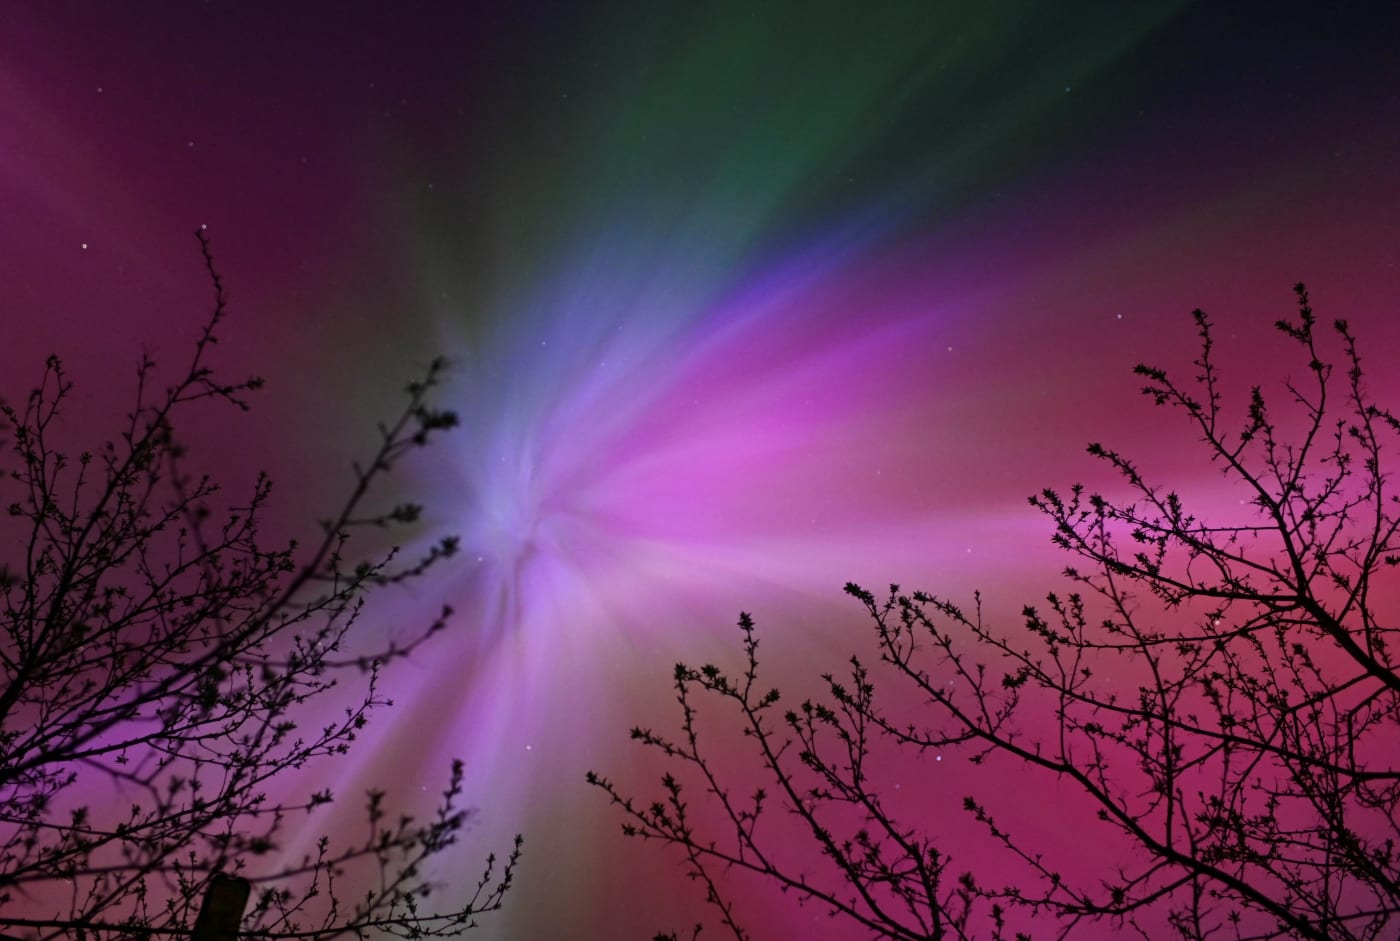 'Extreme' geomagnetic storm may bless us with more aurora displays tonight and tomorrow